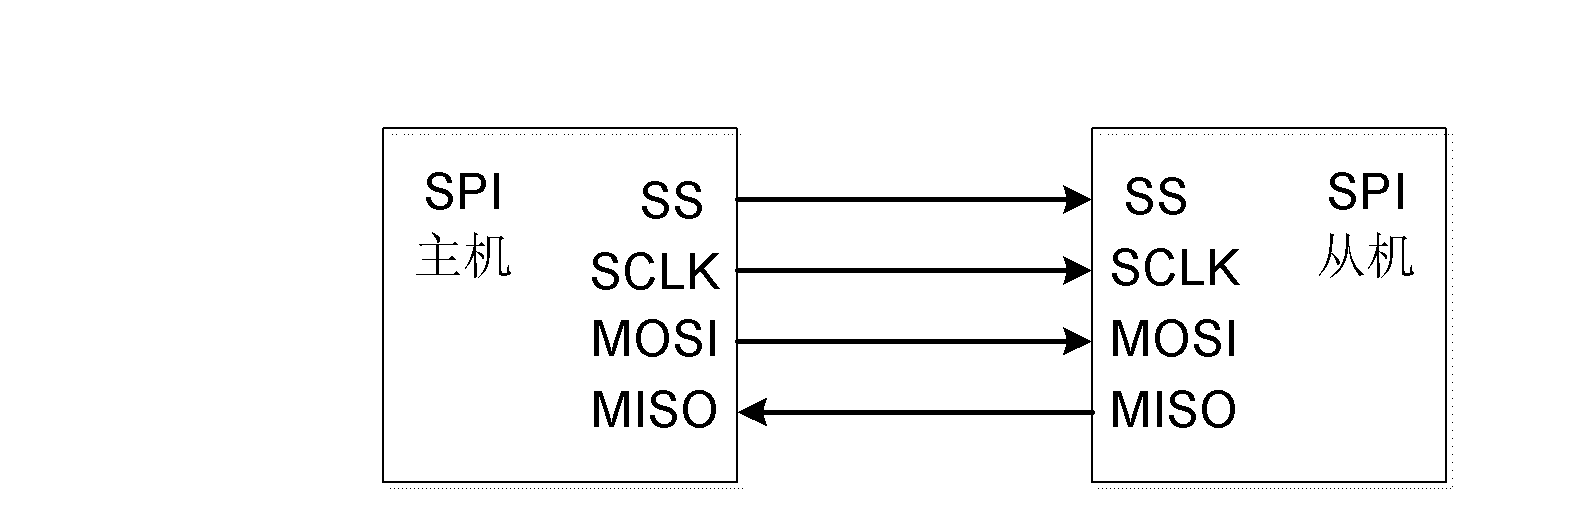 Serial Peripheral Interface (SPI) controller and communication method